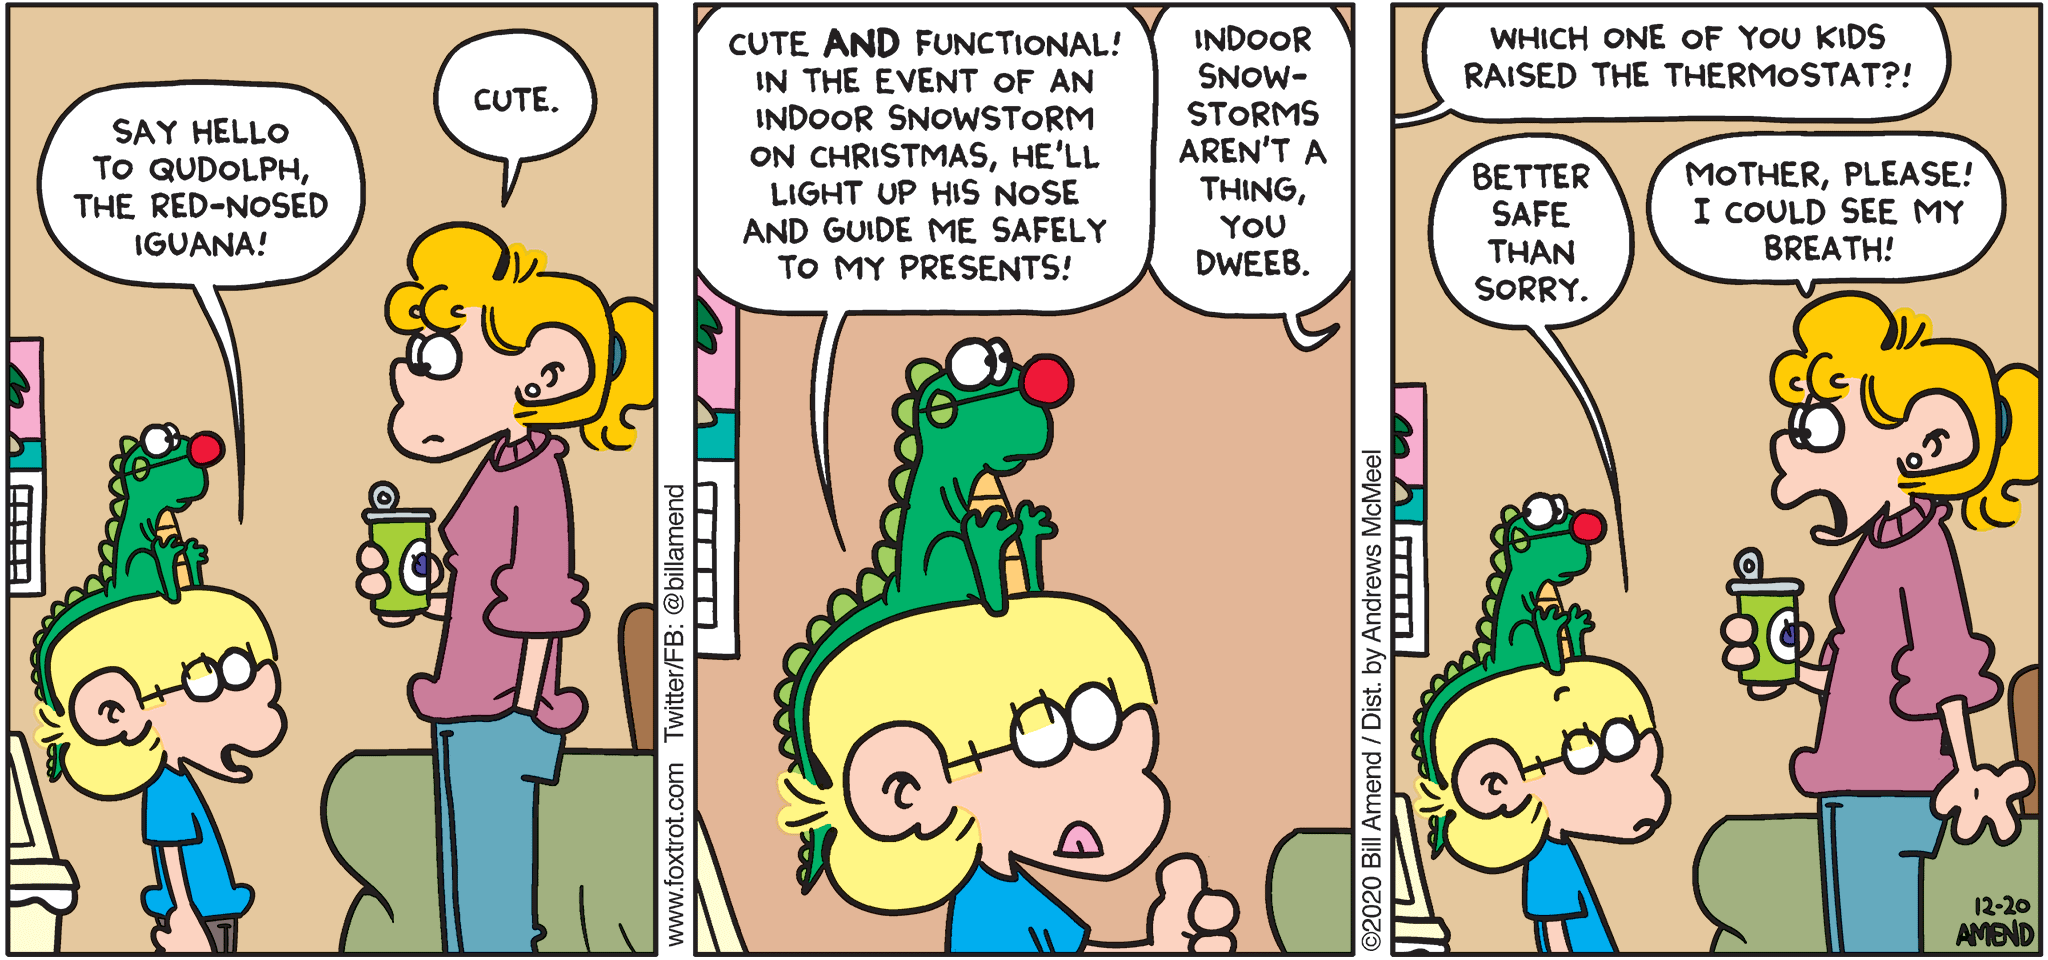 FoxTrot comic strip by Bill Amend - "Qudolph" published December 20, 2020 - Jason: Say hello to Qudolph, the red-nosed iguana! Paige: Cute. Jason: Cute AND functional! In the event of an indoor snowstorm on Christmas, he'll light up his nose and guide me safely to my presents! Paige: Indoor snowstorms aren't a thing, you dweeb. Andy: Which one of you kids raised the thermostat?! Jason: Better safe than sorry. Paige: Mother, please! I could see my breath!